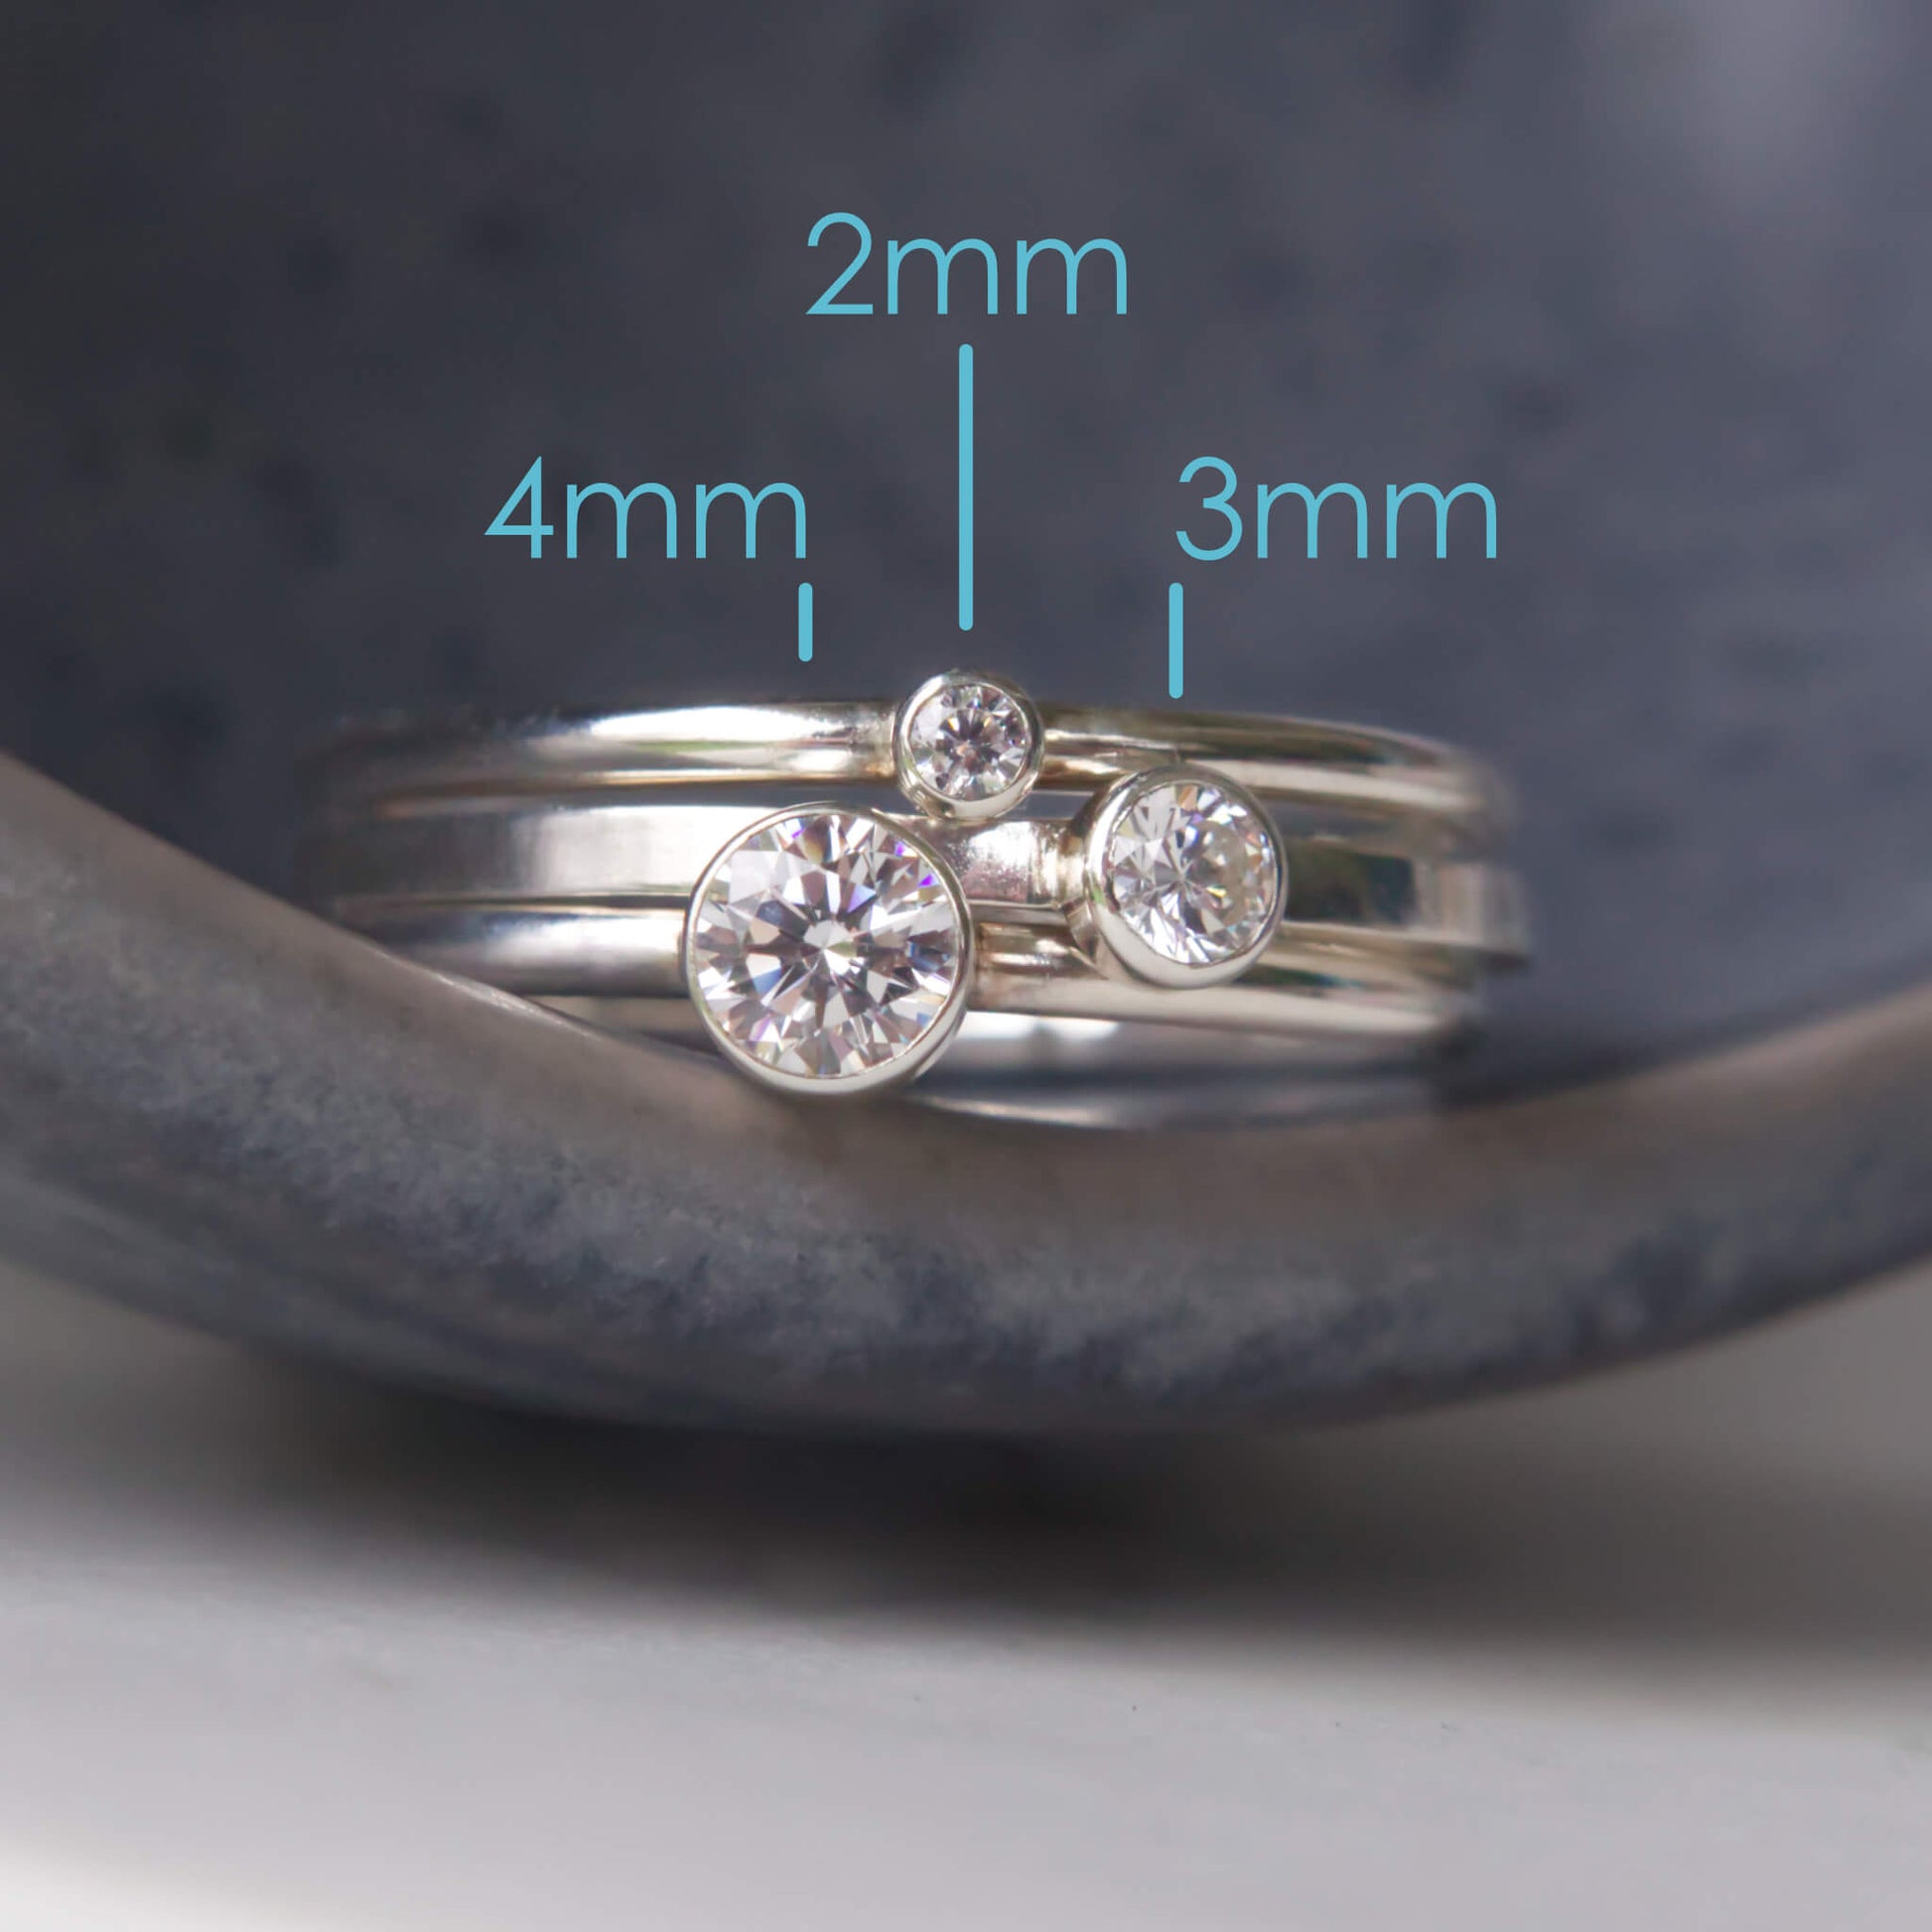 Trio of Diamond Silver Cubic Zirconia Solitaire rings with round stones. Each of the rings have a different sized gem in a 2mm, 3mm and 4mm size, with text to indicate size. Pictured on a grey ceramic background. RIngs handmade by maram jewellery in Scotland UK